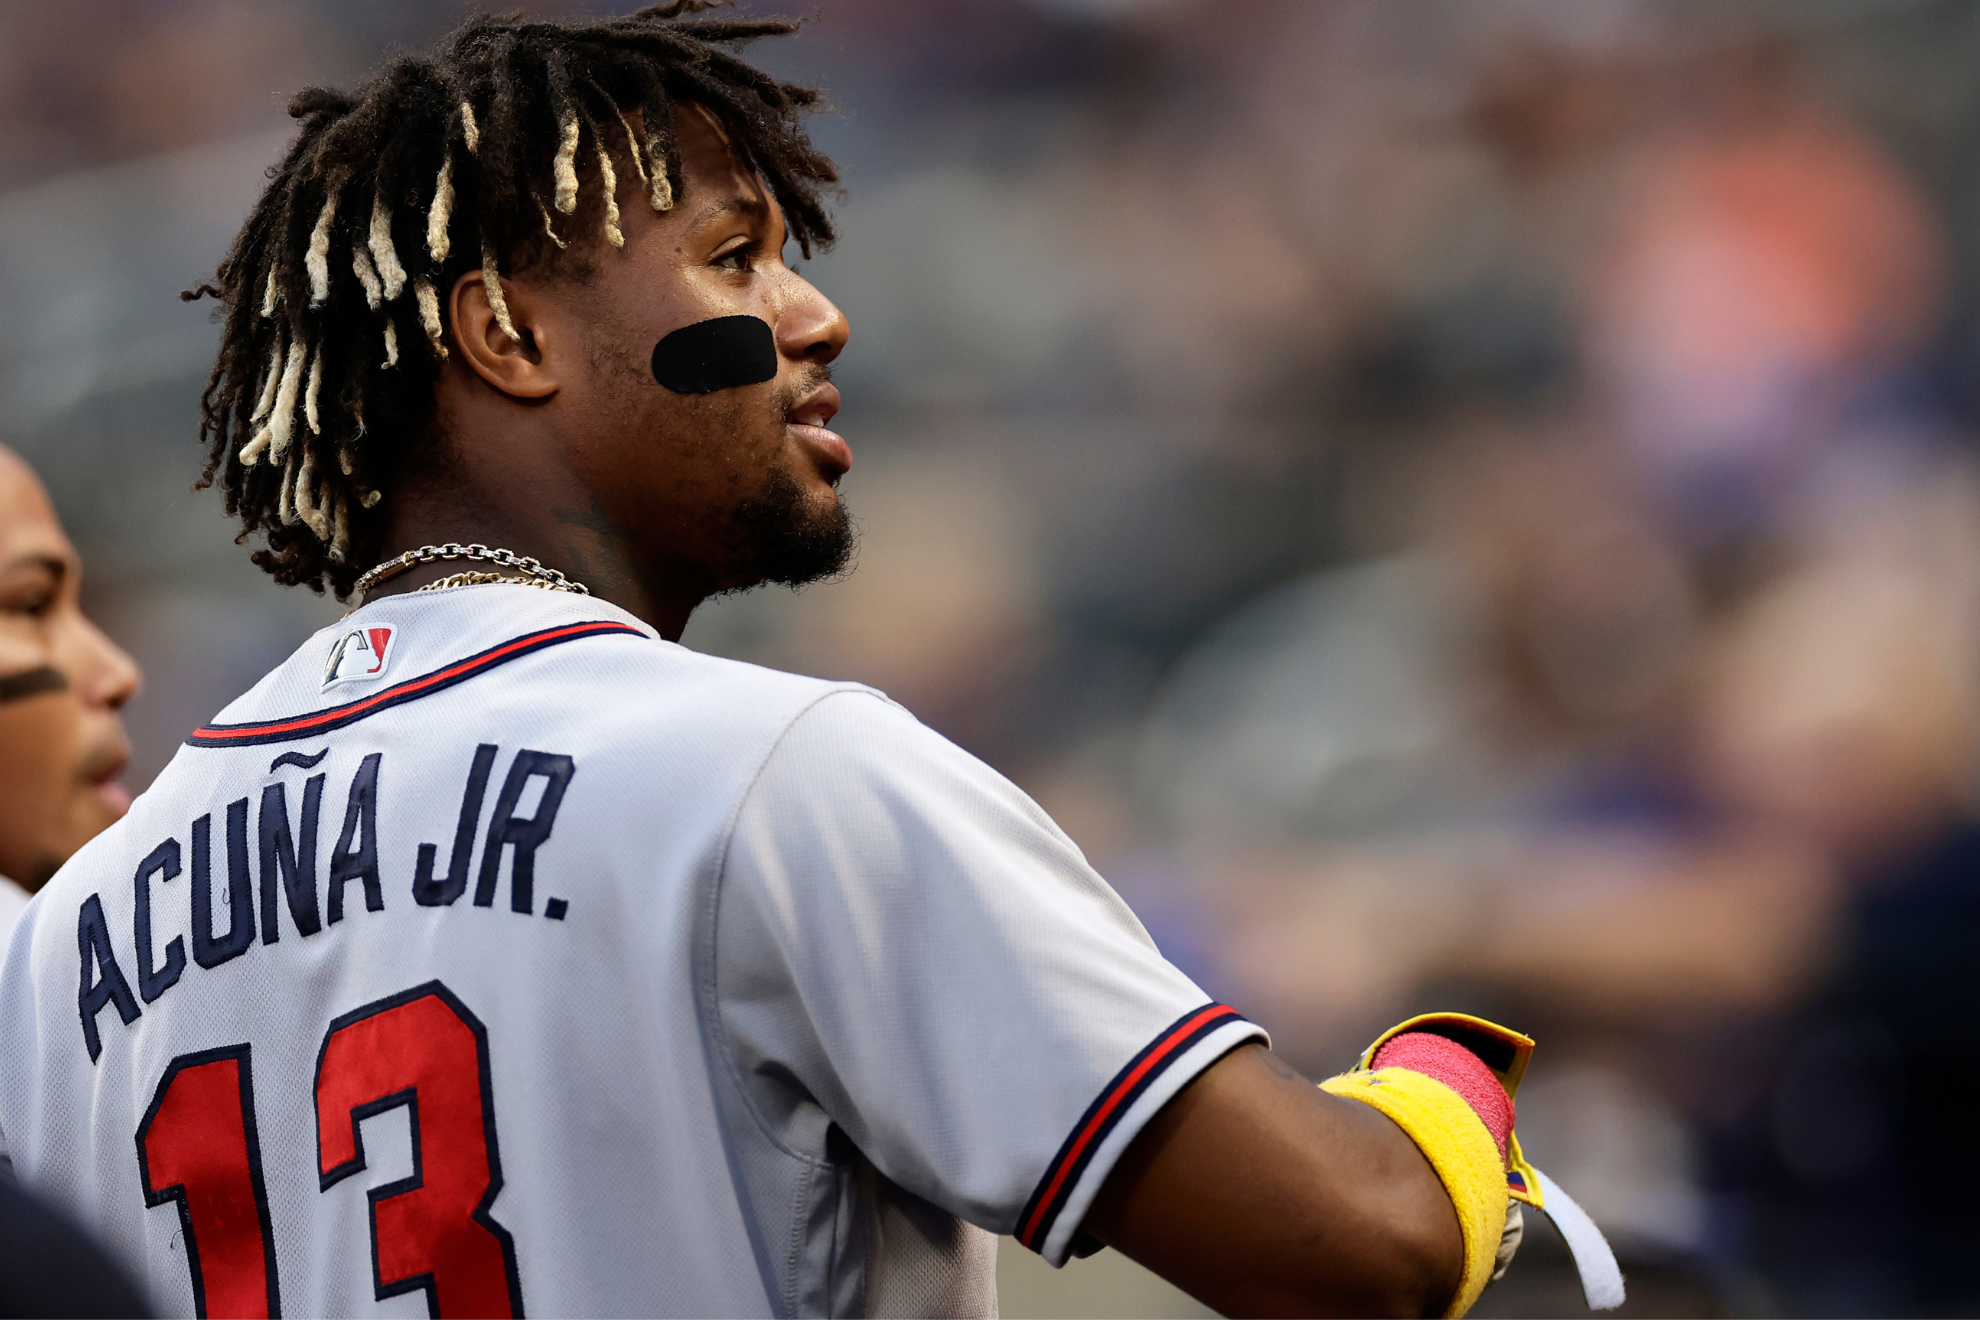 An NL MVP award is likely in Acuna's future.